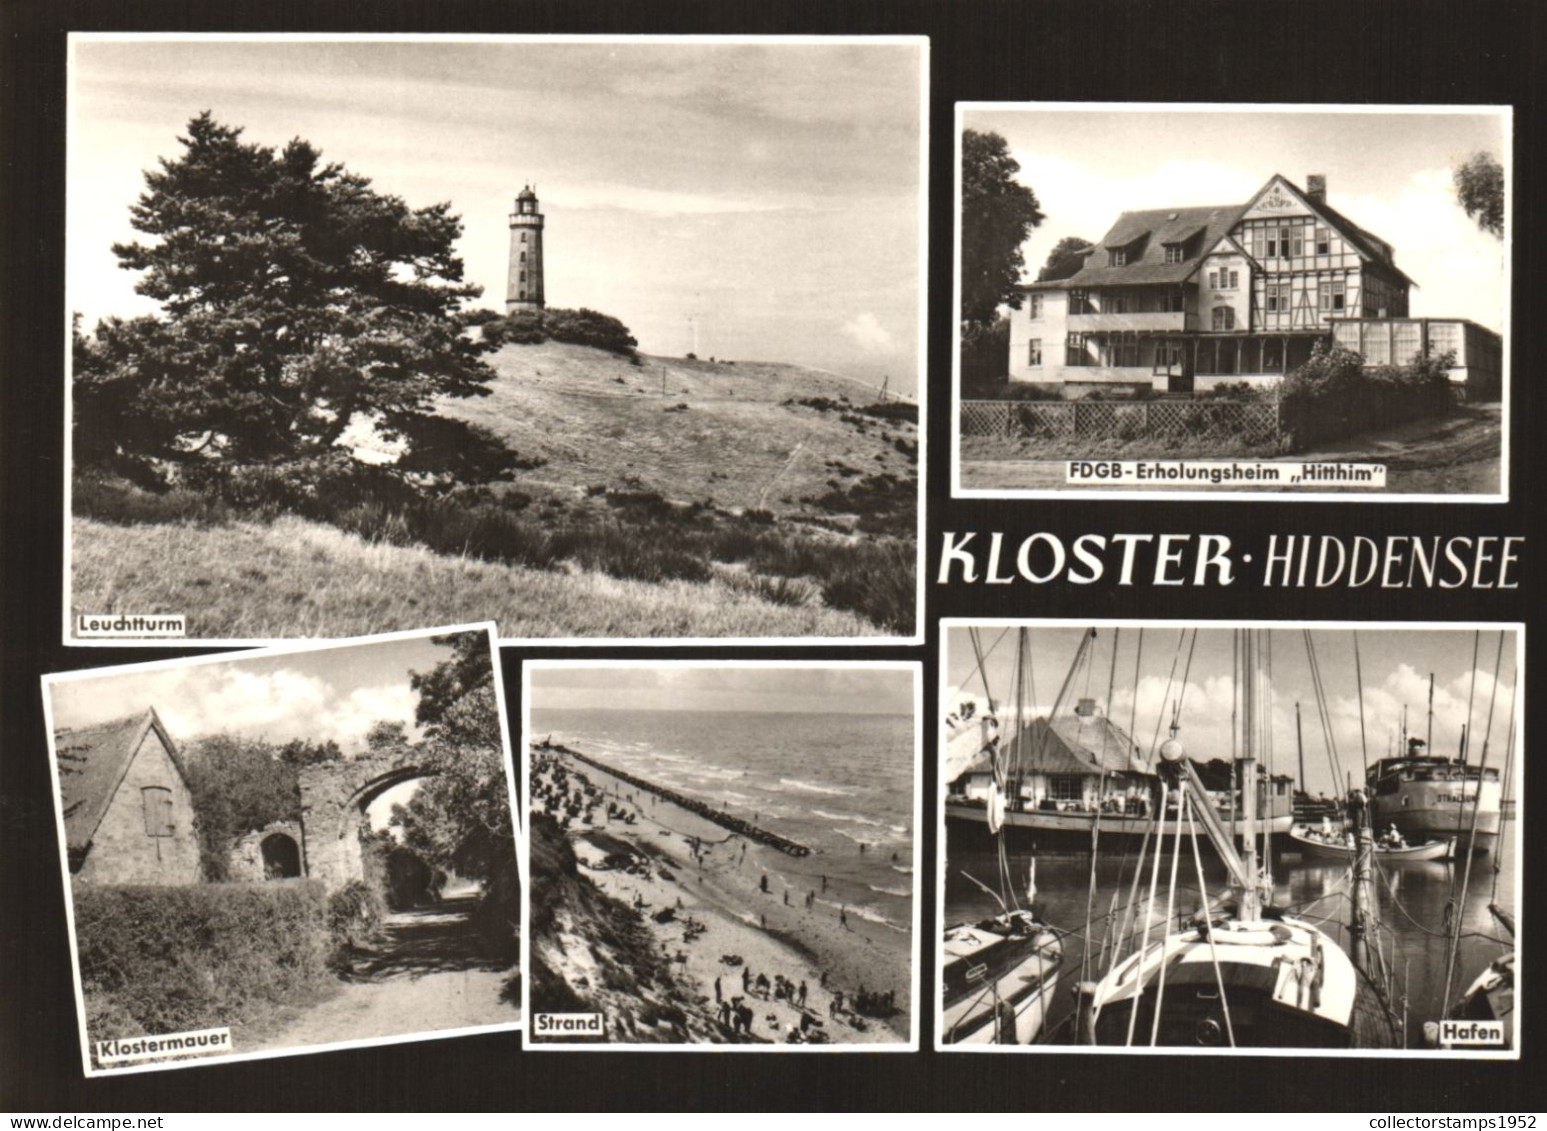 KLOSTER HIDDENSEE, MULTIPLE VIEWS, TOWER, ARCHITECTURE, GATE, BEACH, PORT, BOATS, GERMANY - Hiddensee